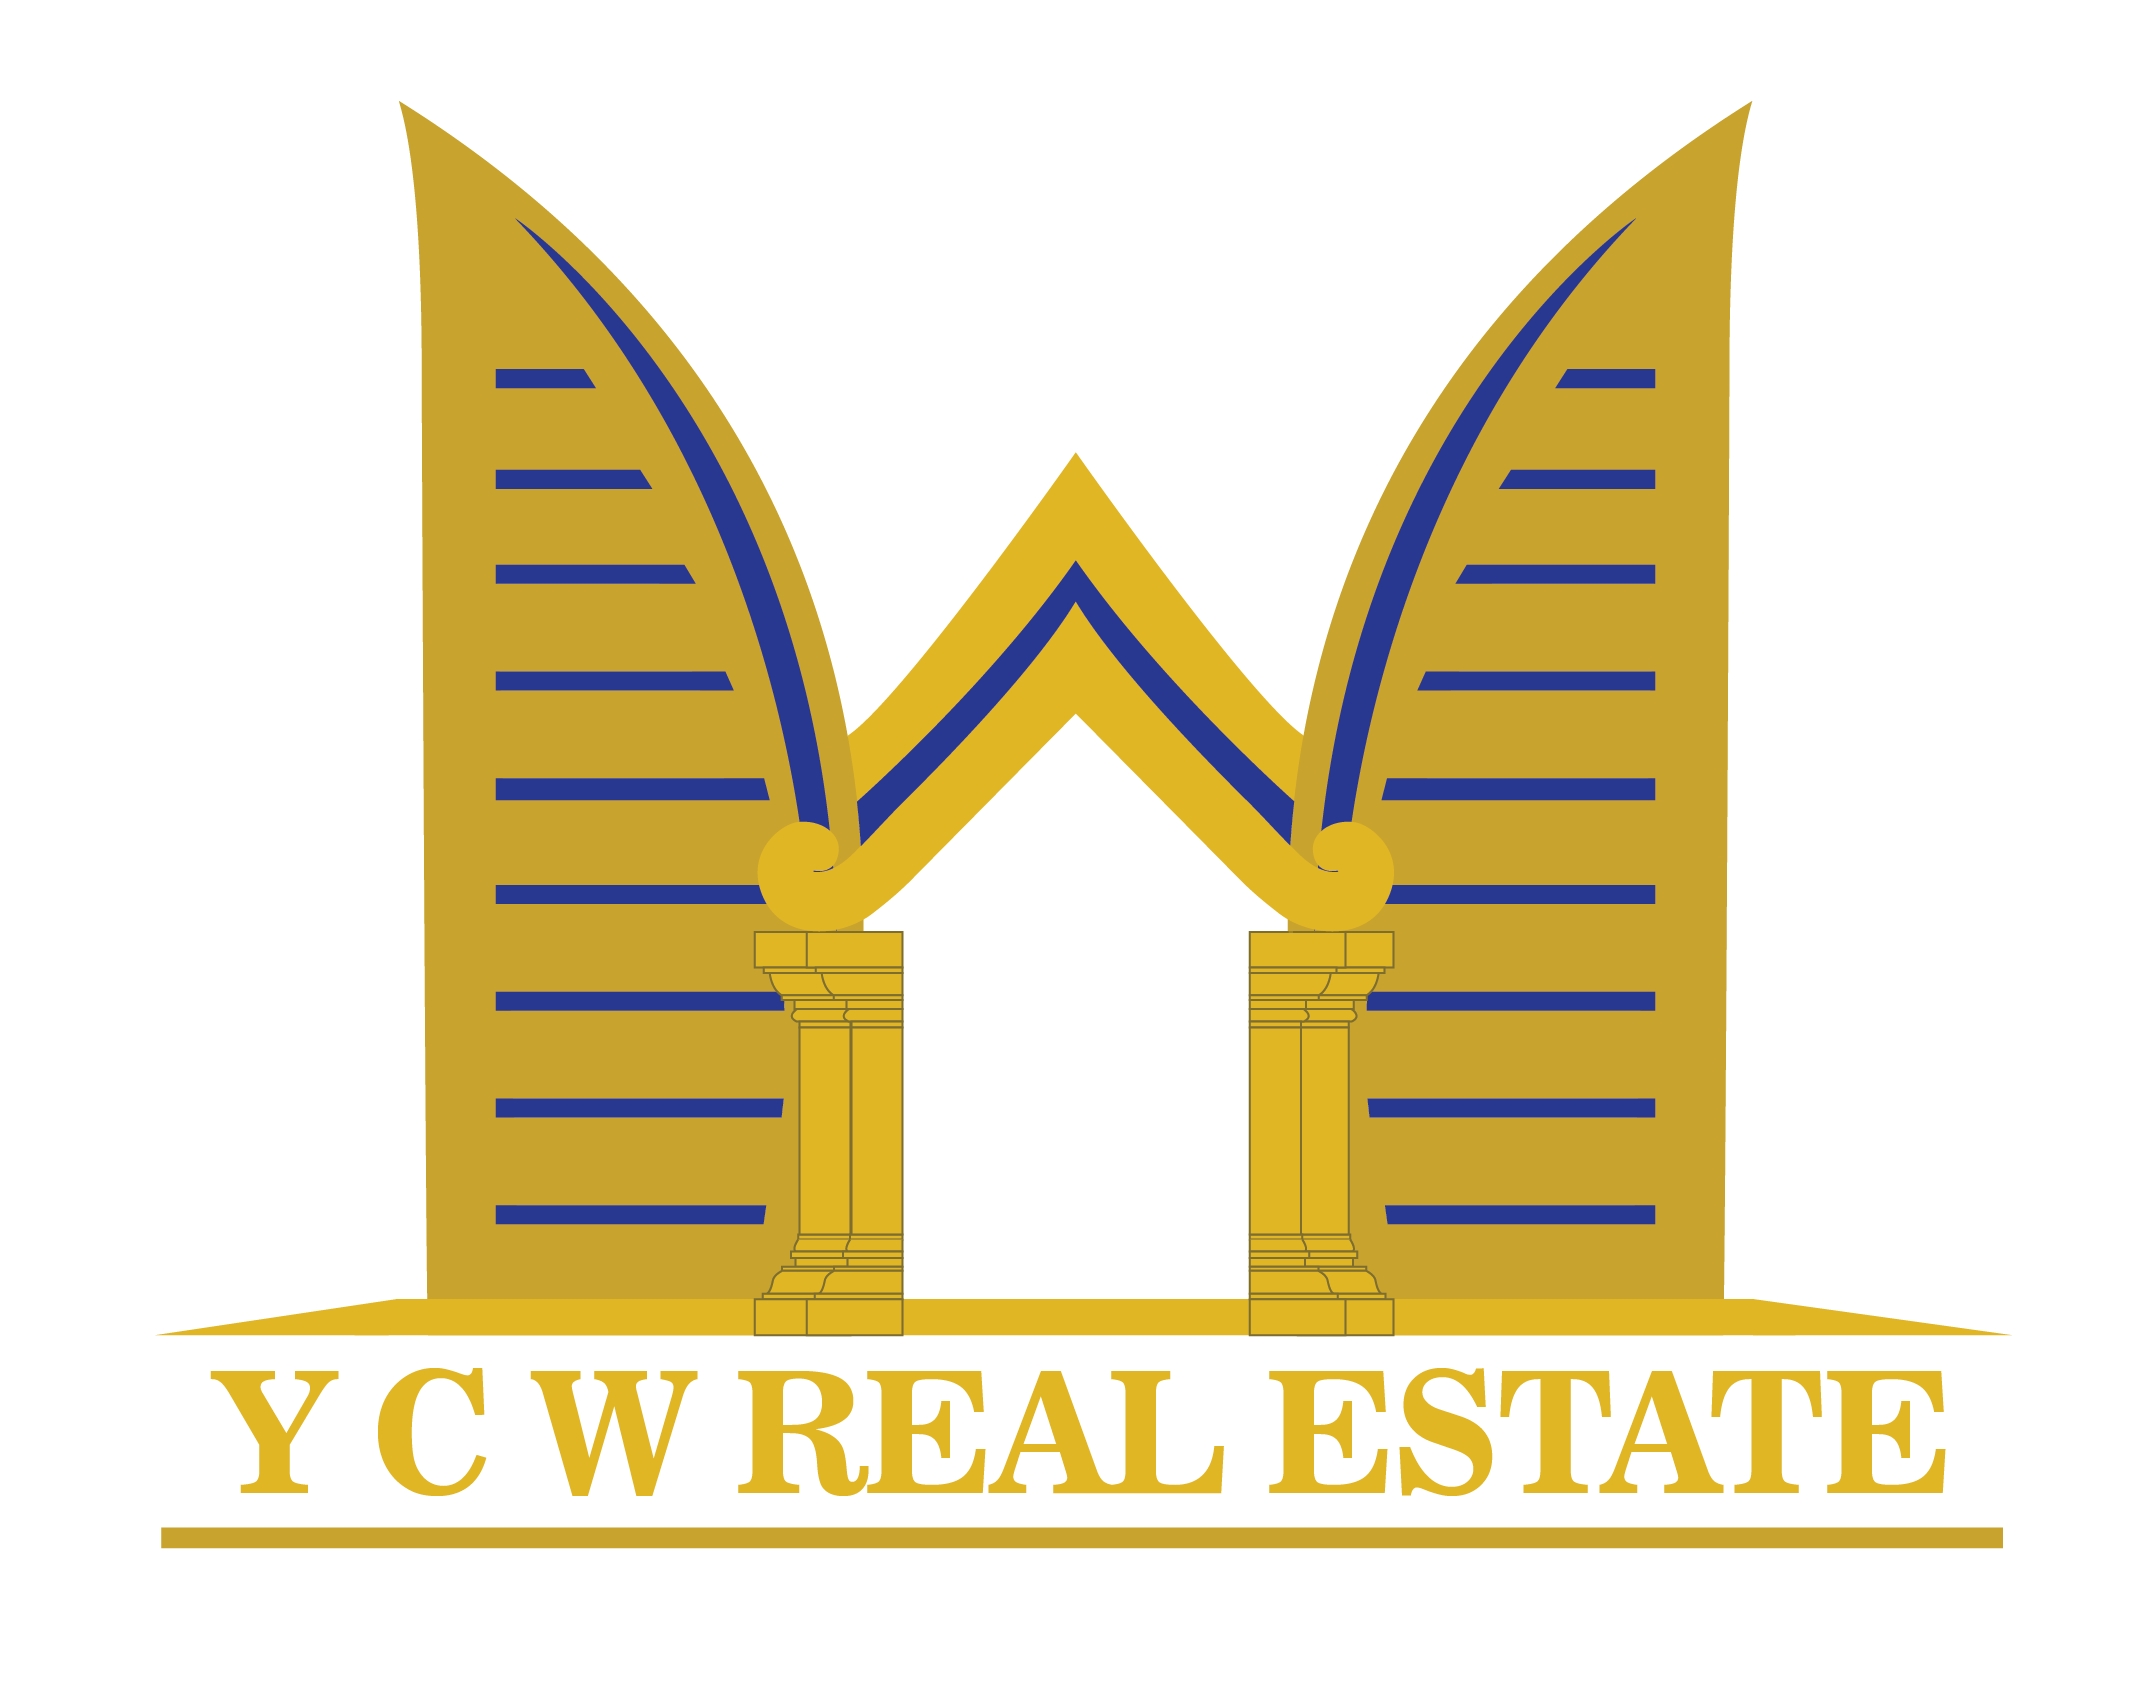 You can Win Real Estate